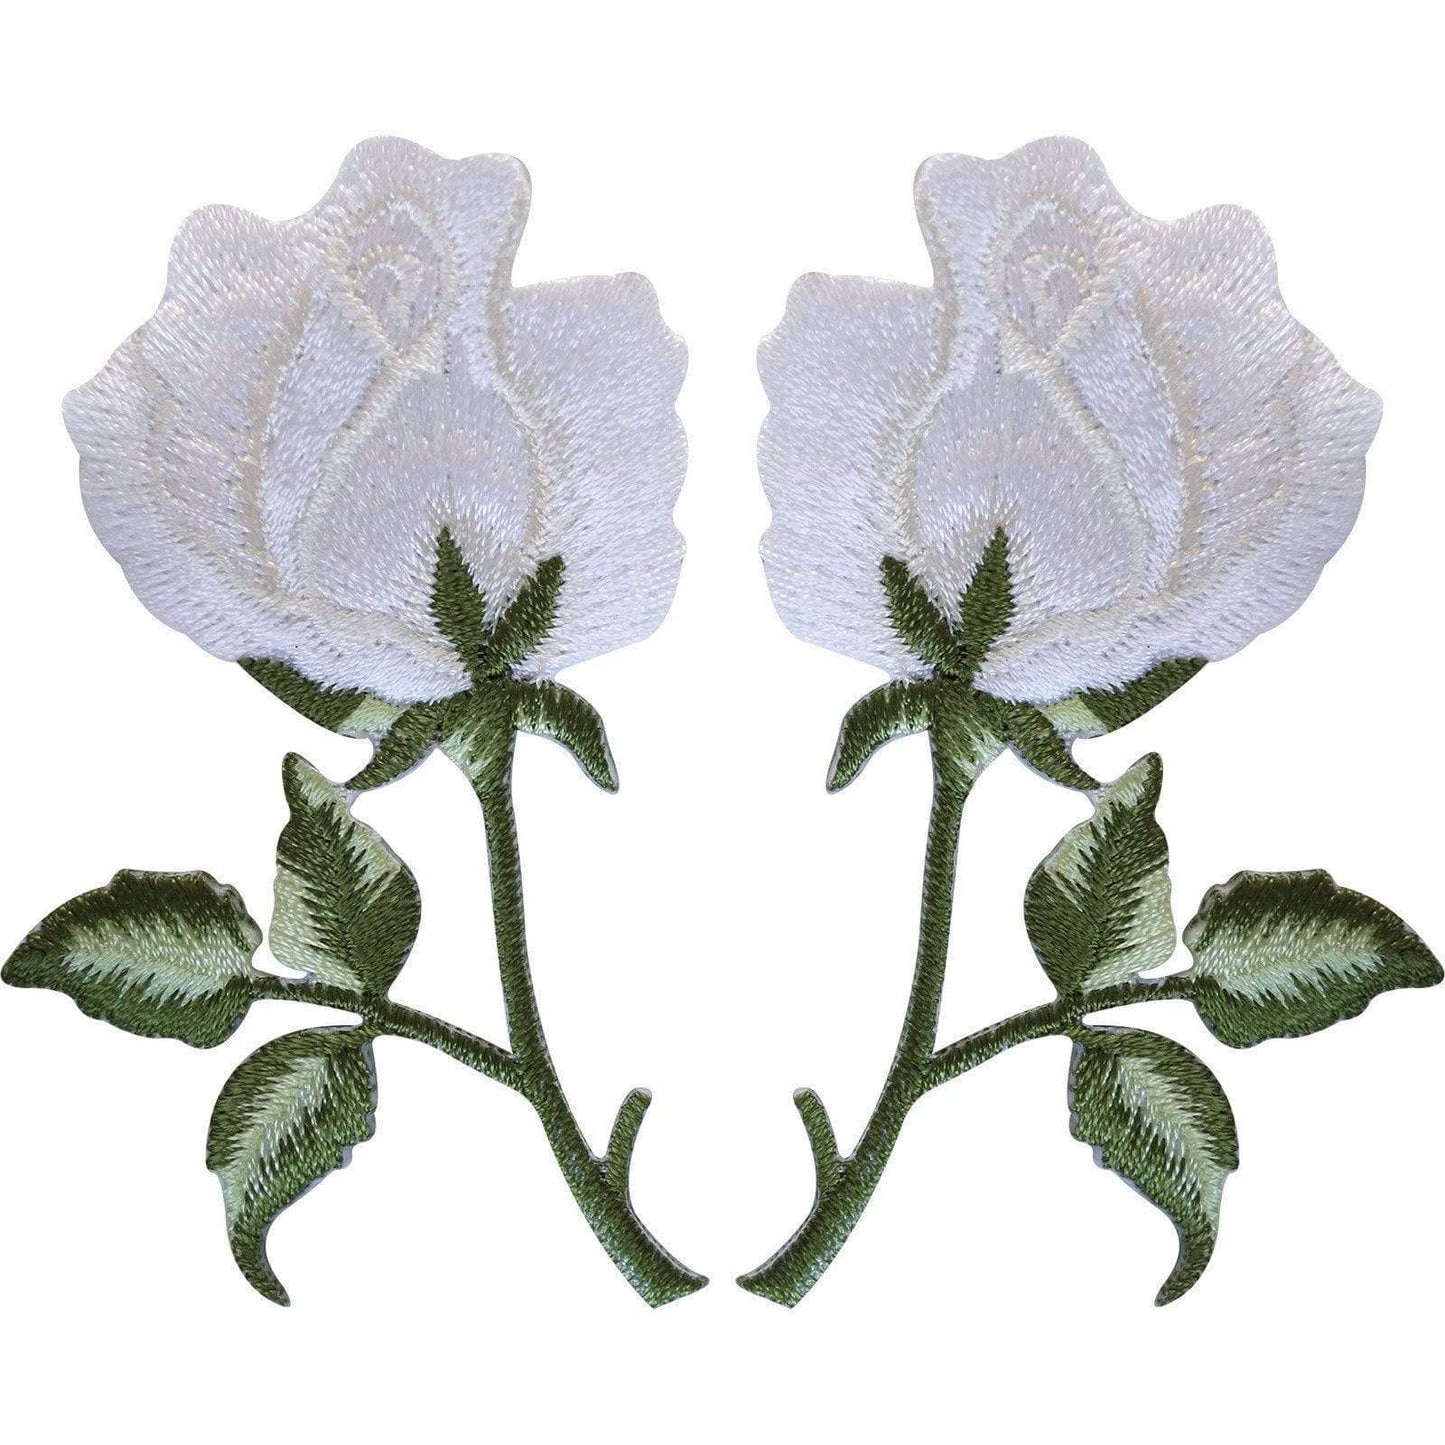 Pair of White Rose Patches Iron On Sew On Embroidered Roses Flowers Patch Badge